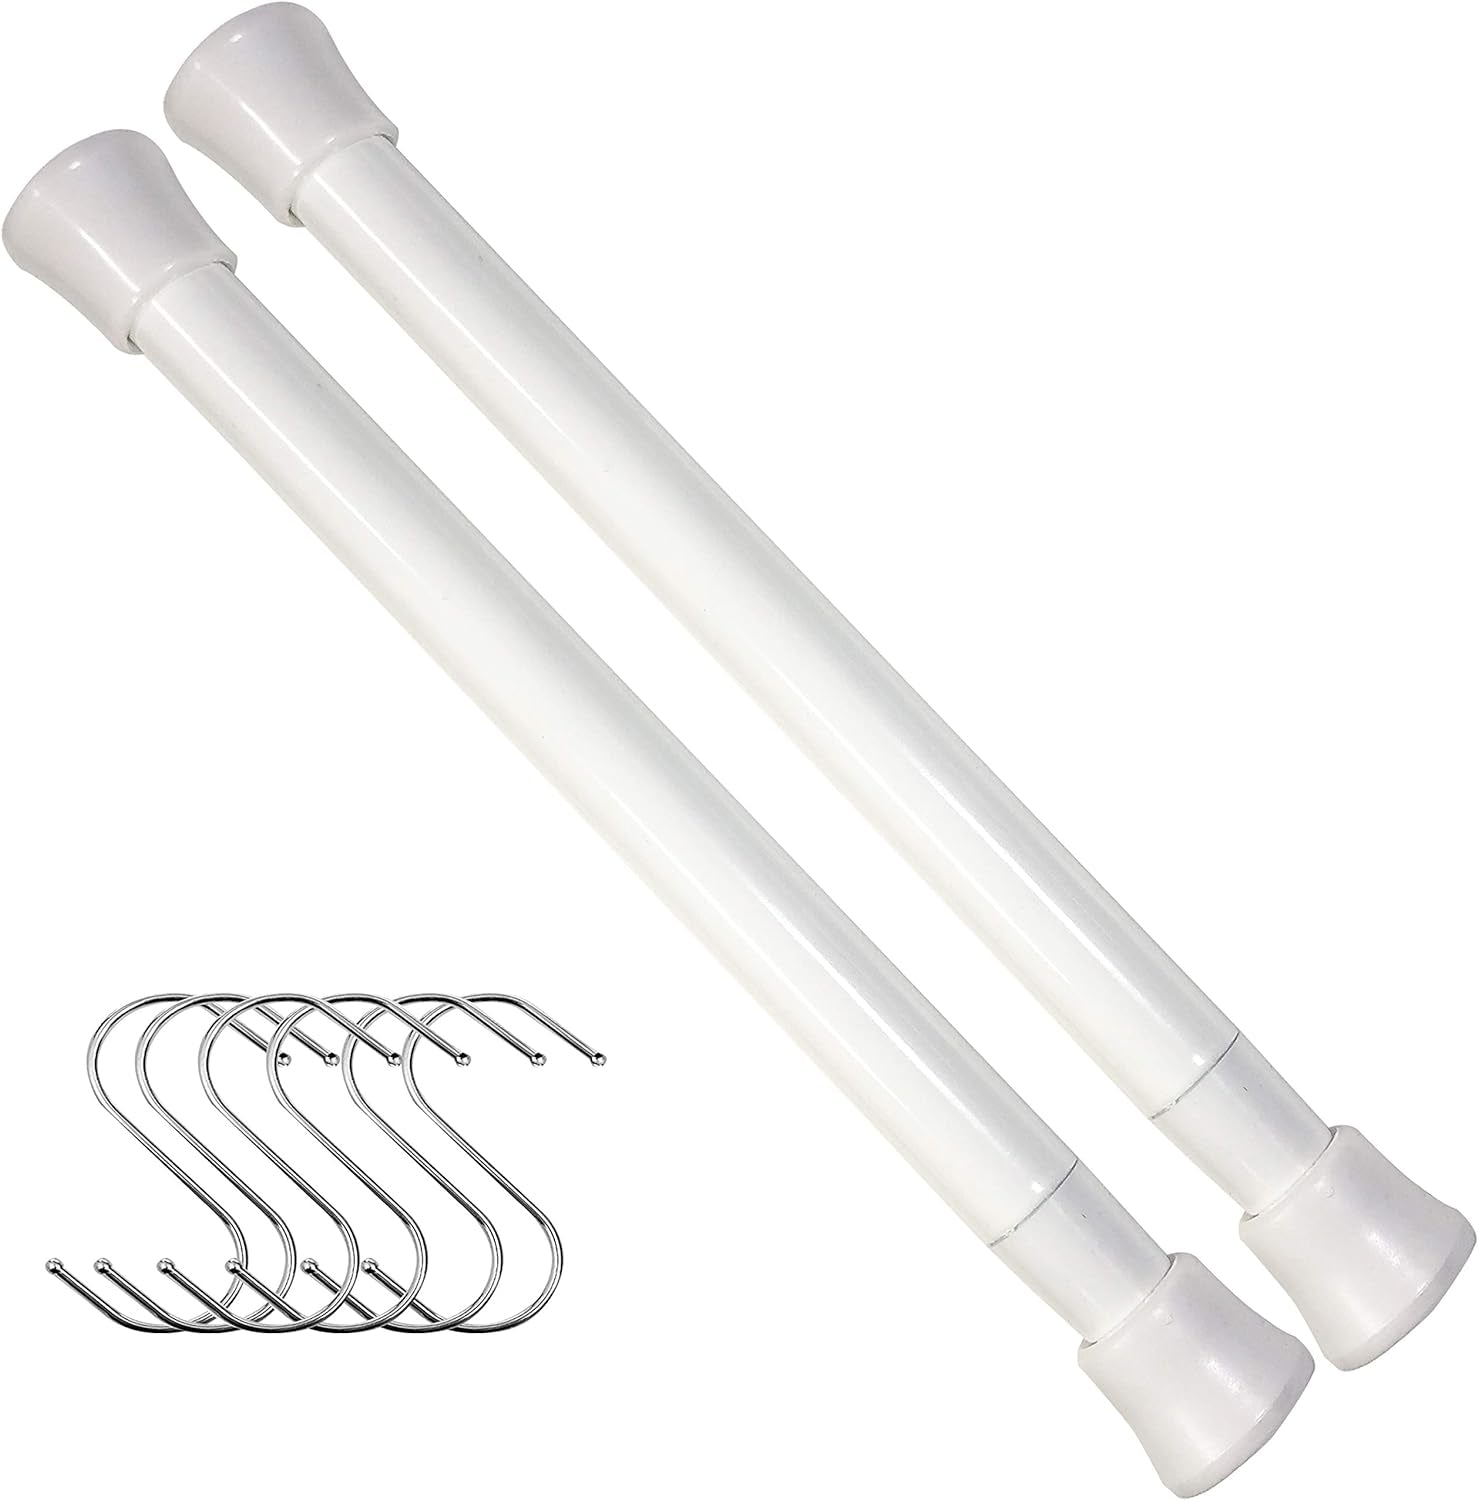 Expandable Small Spring Tension Rod - 7 to 11 Inches 2 Pack of White Mini Tension Pole and 6 S Shaped Hooks for Window, Curtain, Bathroom